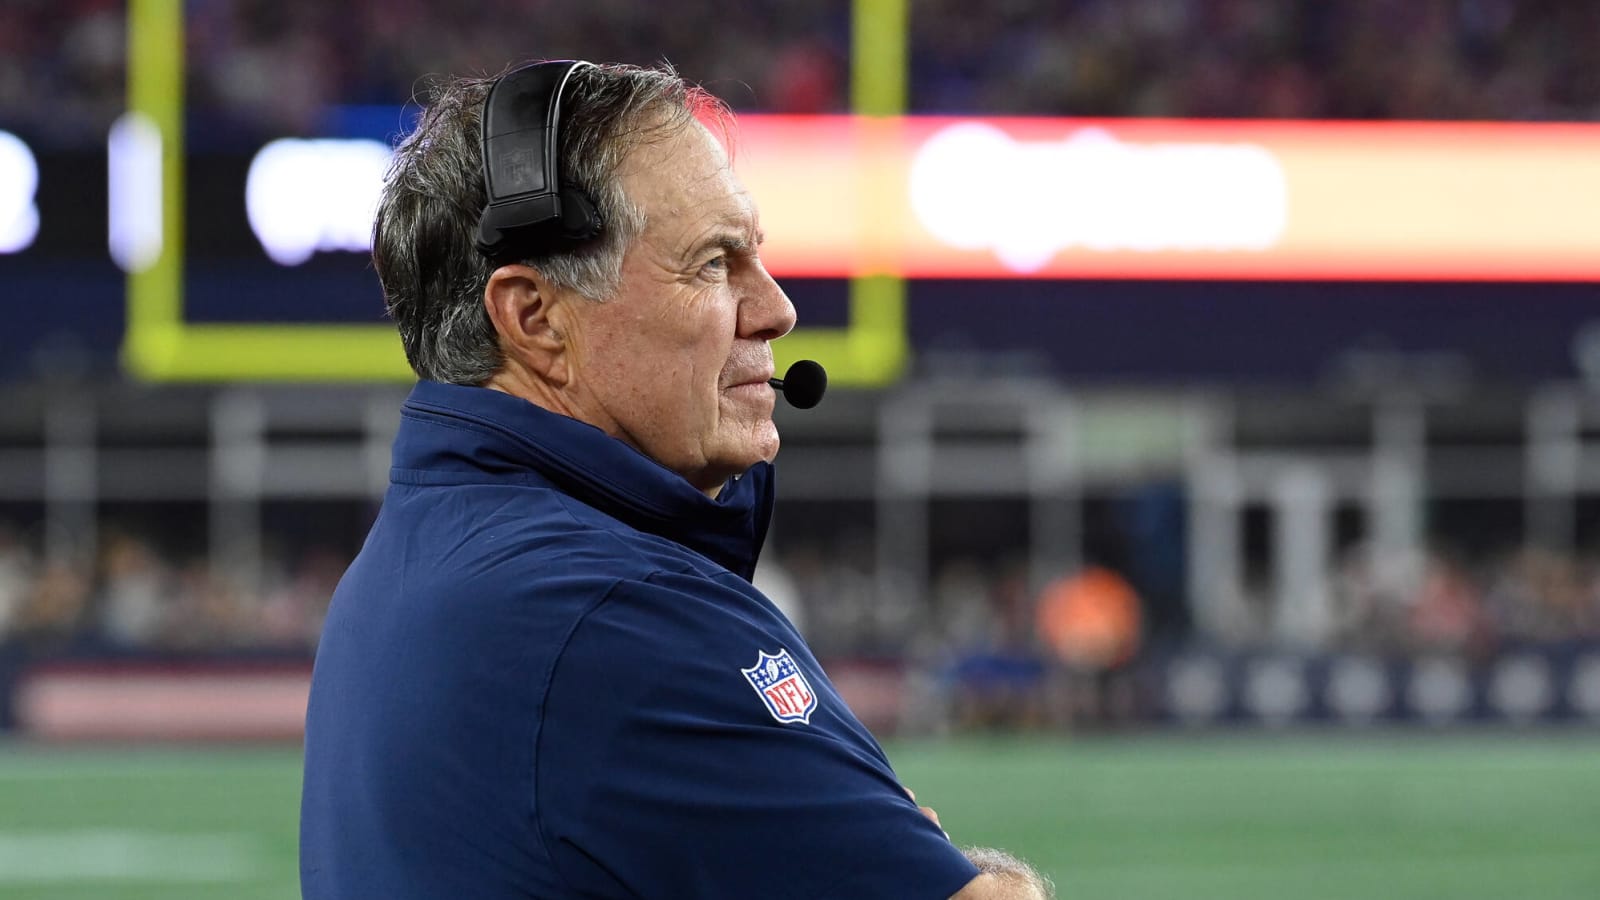 Can the Patriots' offseason special team revamp spur them back into playoff contention?